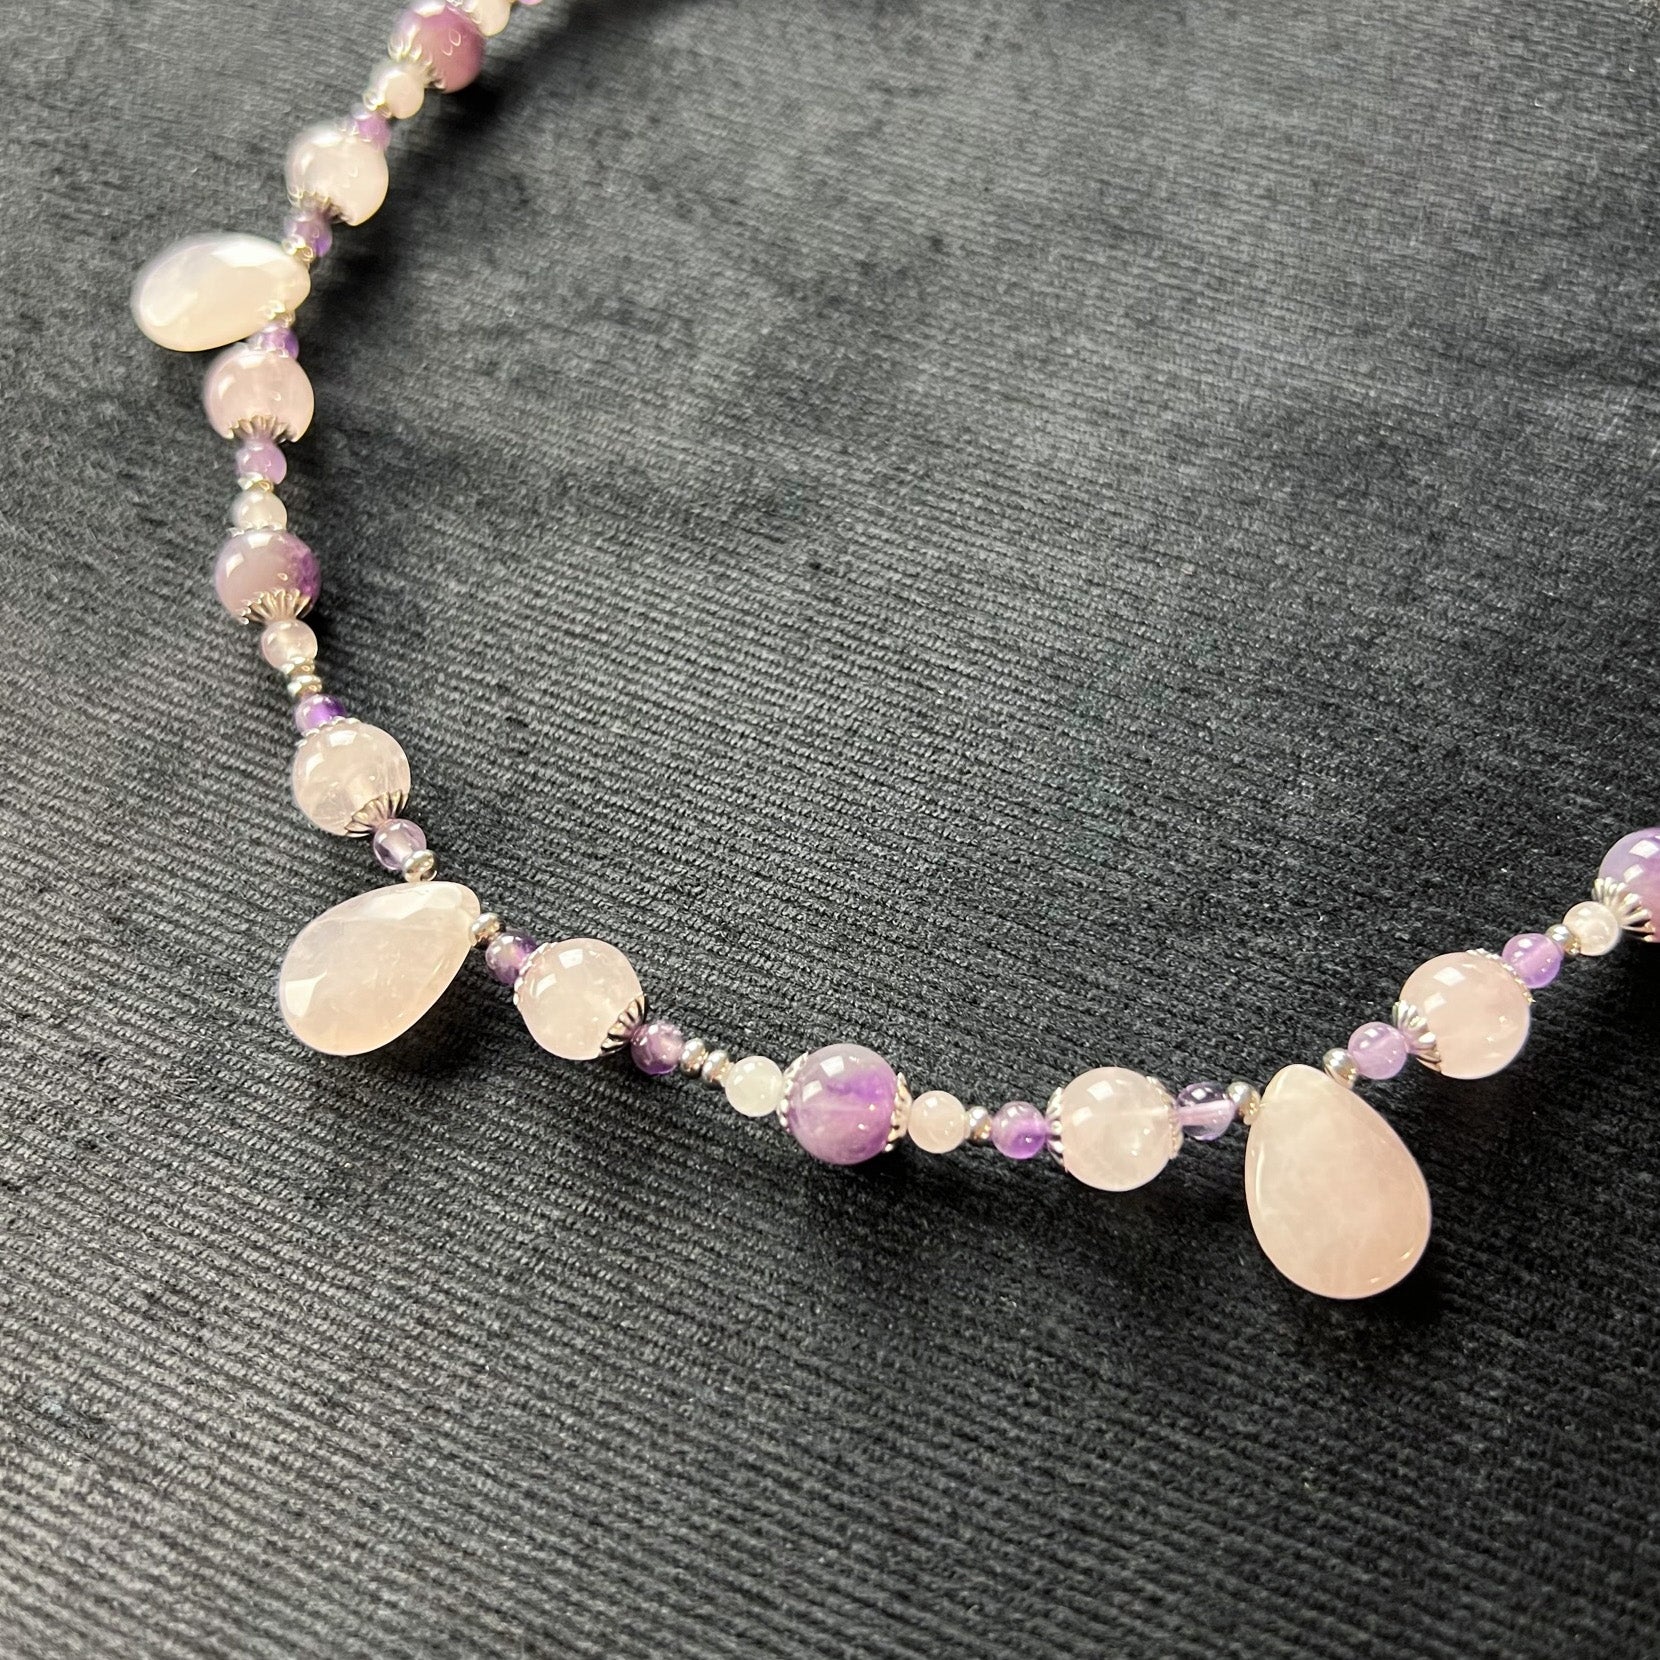 Gemstone beaded necklace quartz amethyst and stainless steel Rêveries Collection royalcore necklace gift for her